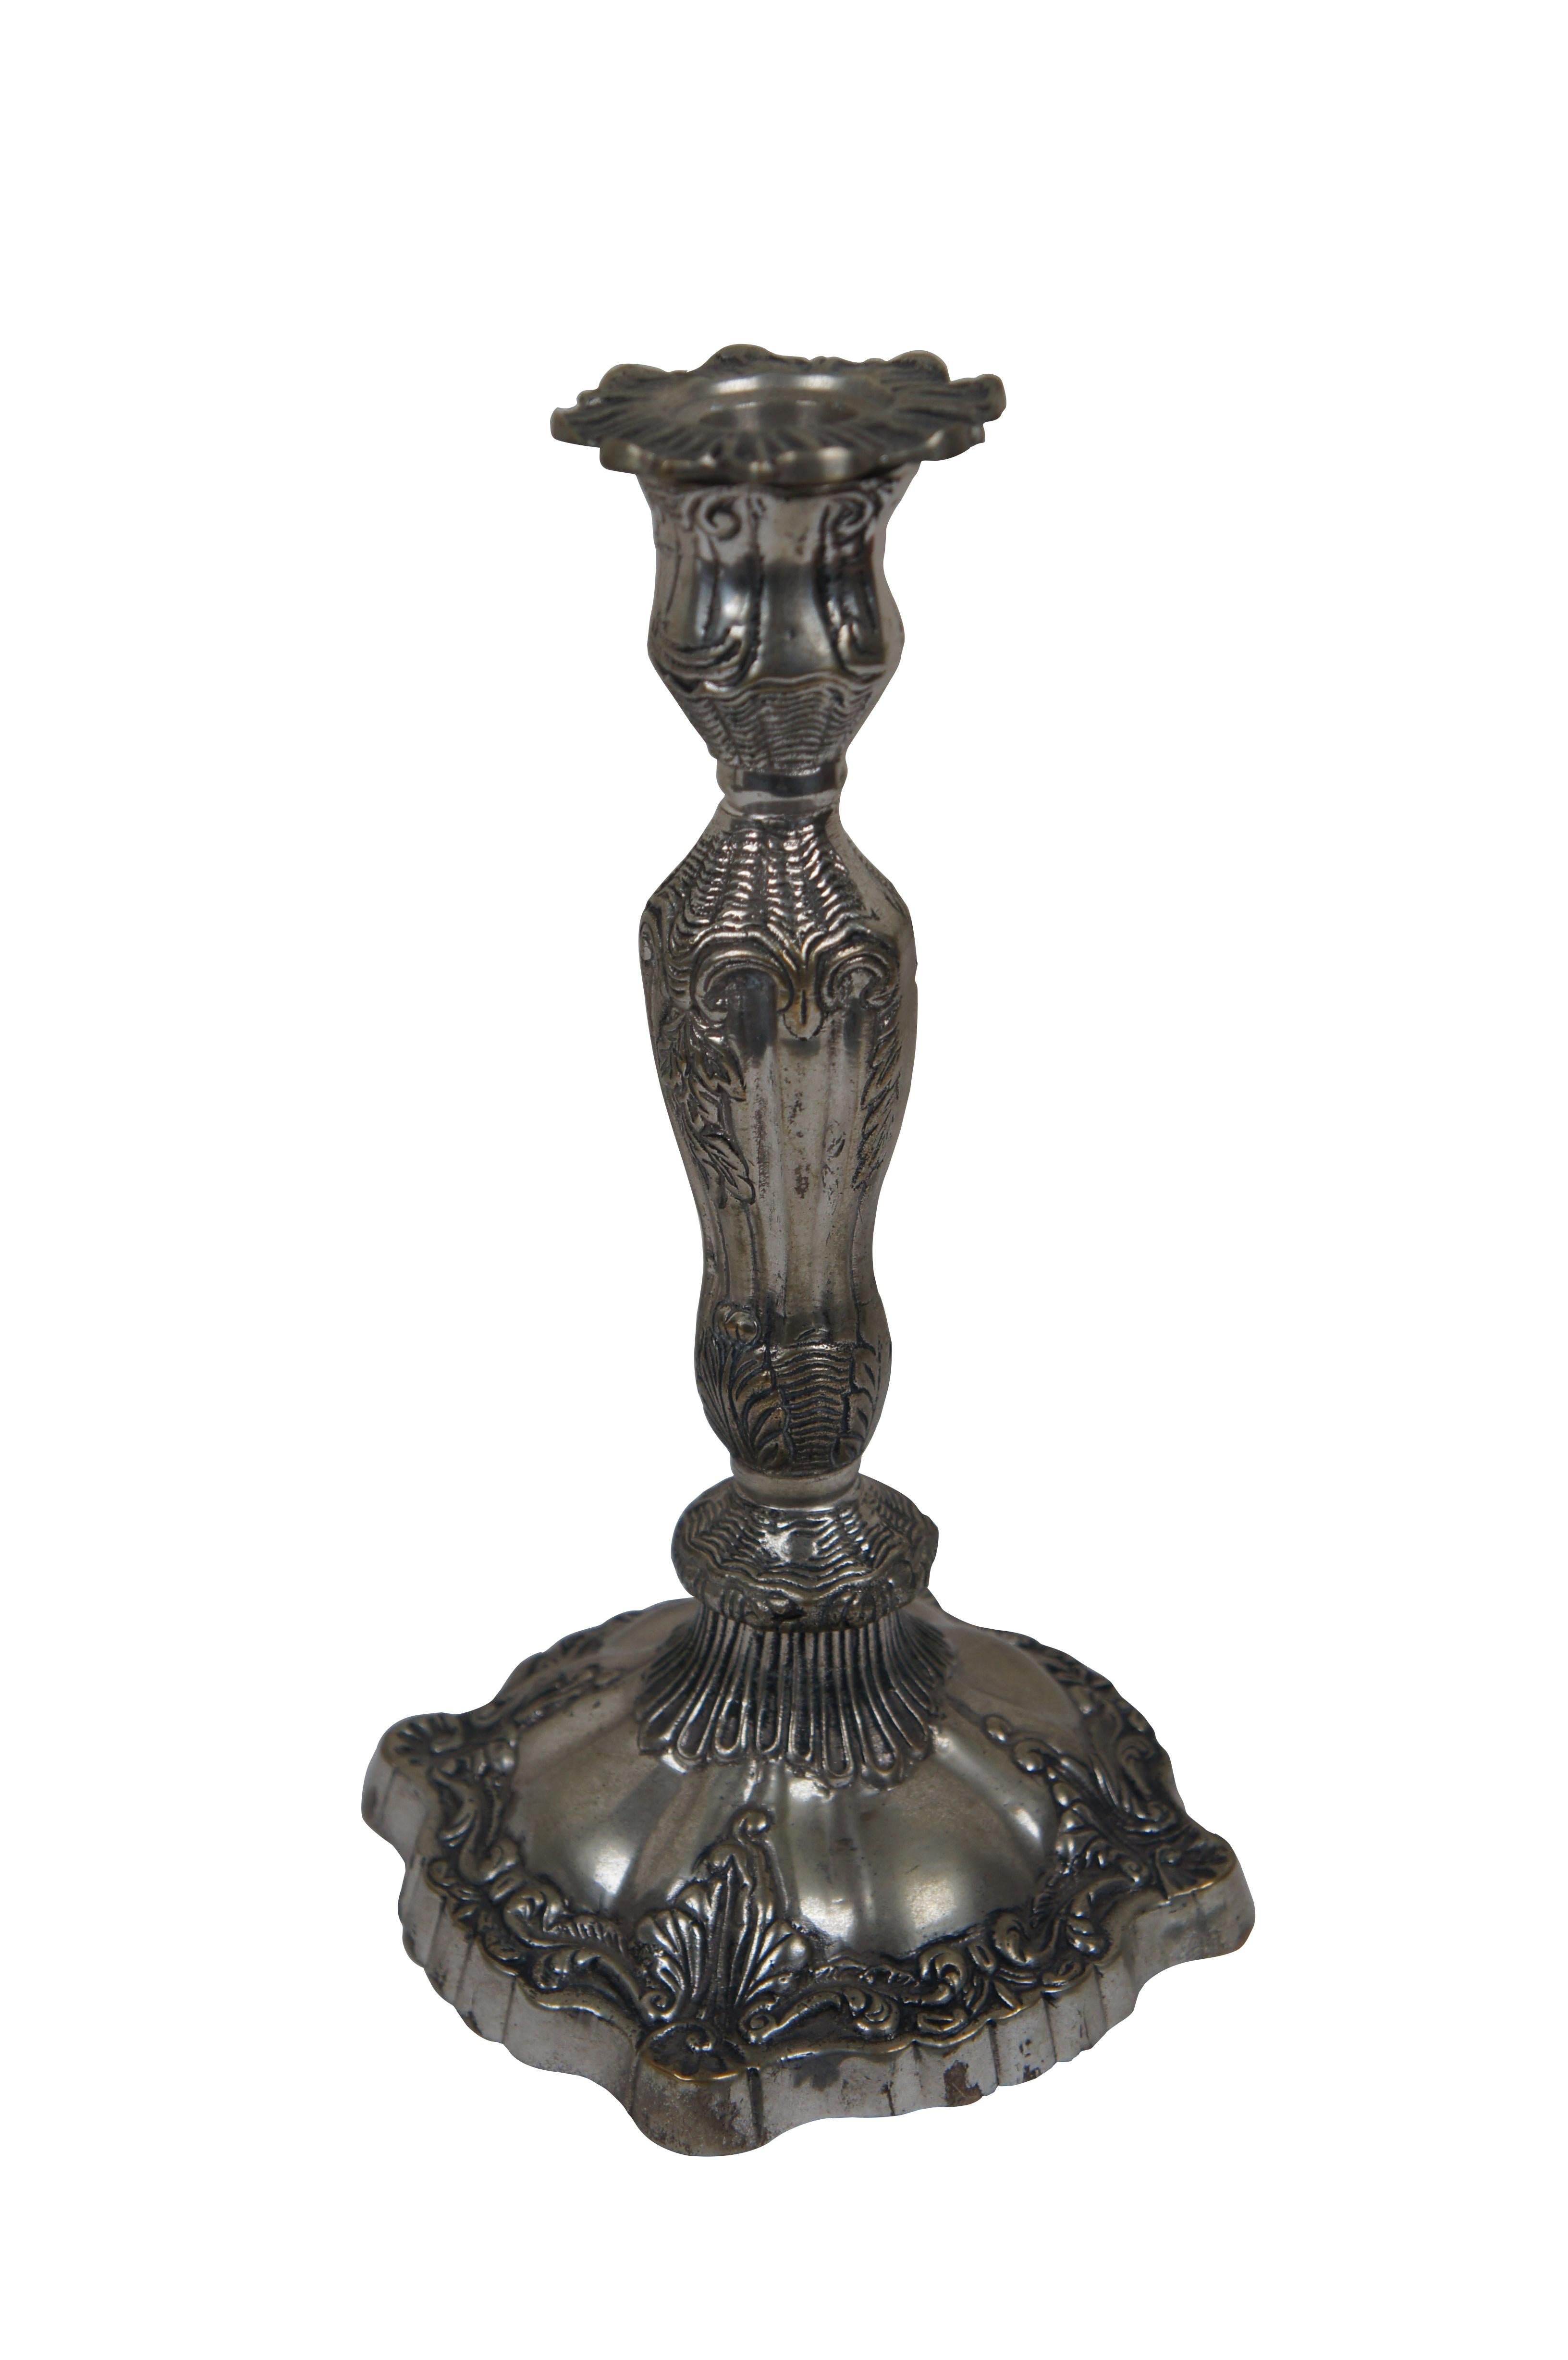 Pair of heavy late 19th to early 20th century Victorian silverplate candlesticks featuring flower petal candle cups and art nouveau scallop and foliate designs. 

Dimensions:
5.5